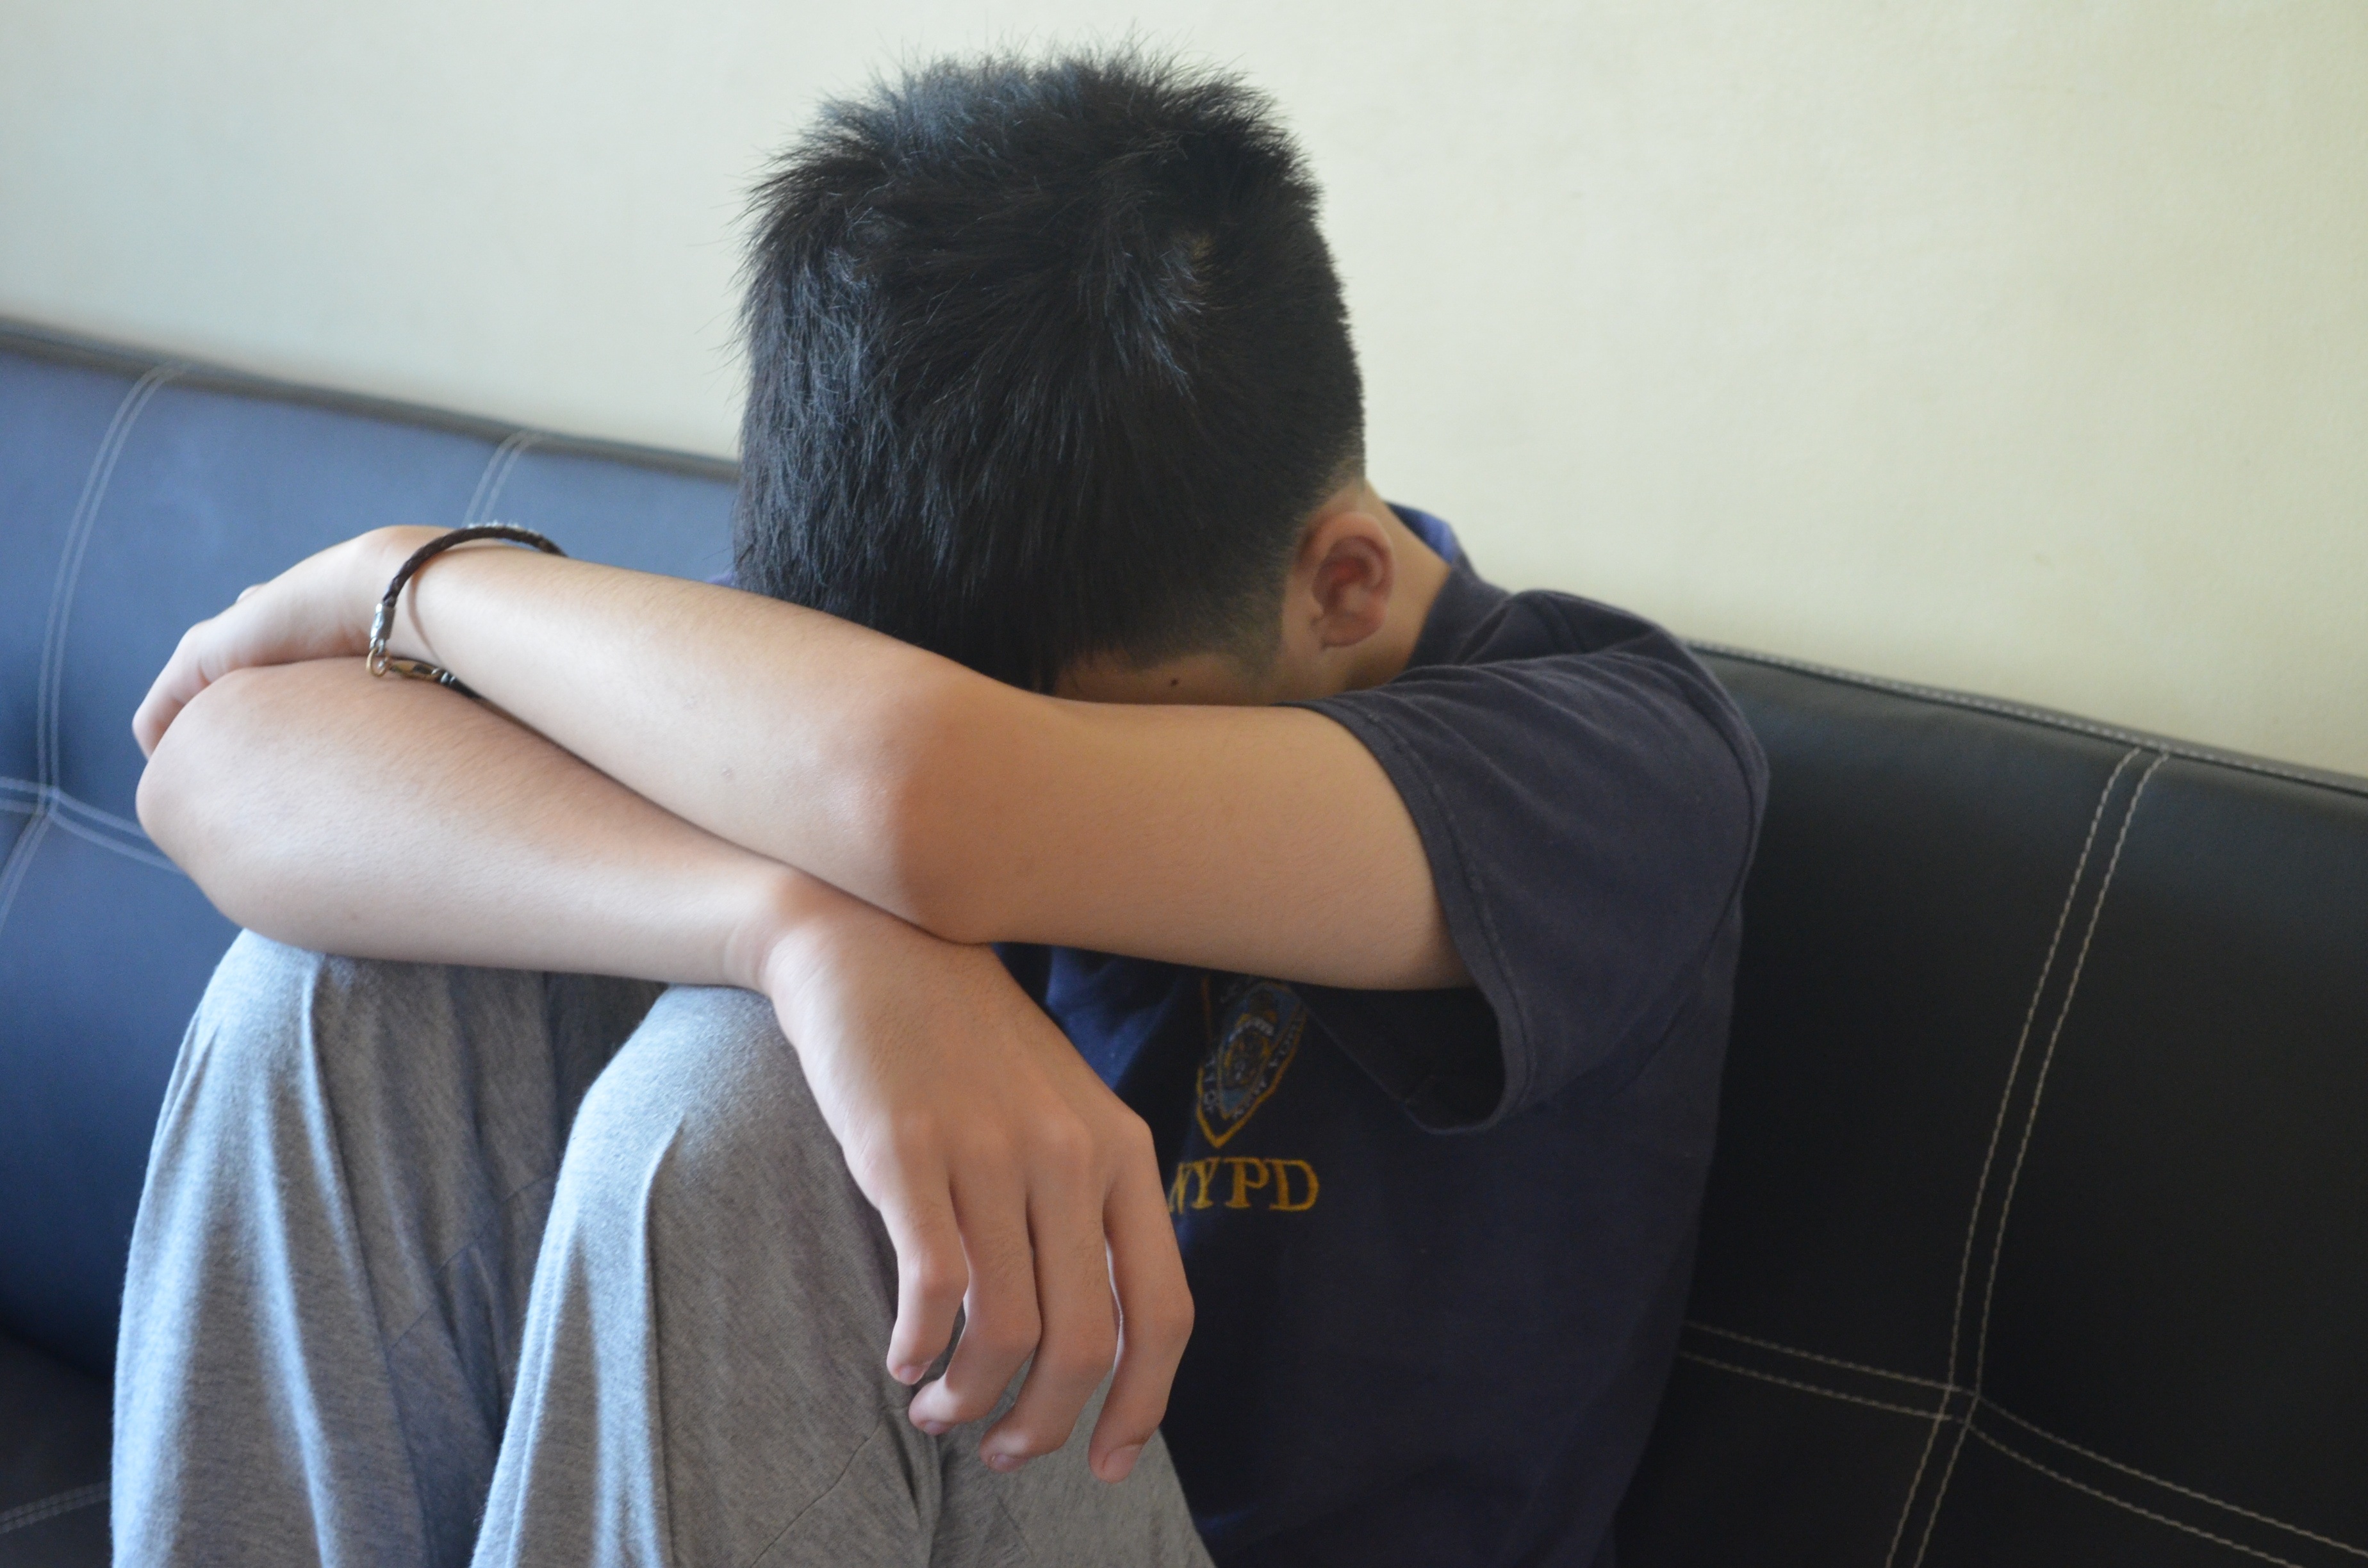 Kidnap Hard Sex Downlod Com - 13-year-old boy sexually abused 'by 21 men' on Grindr | PinkNews